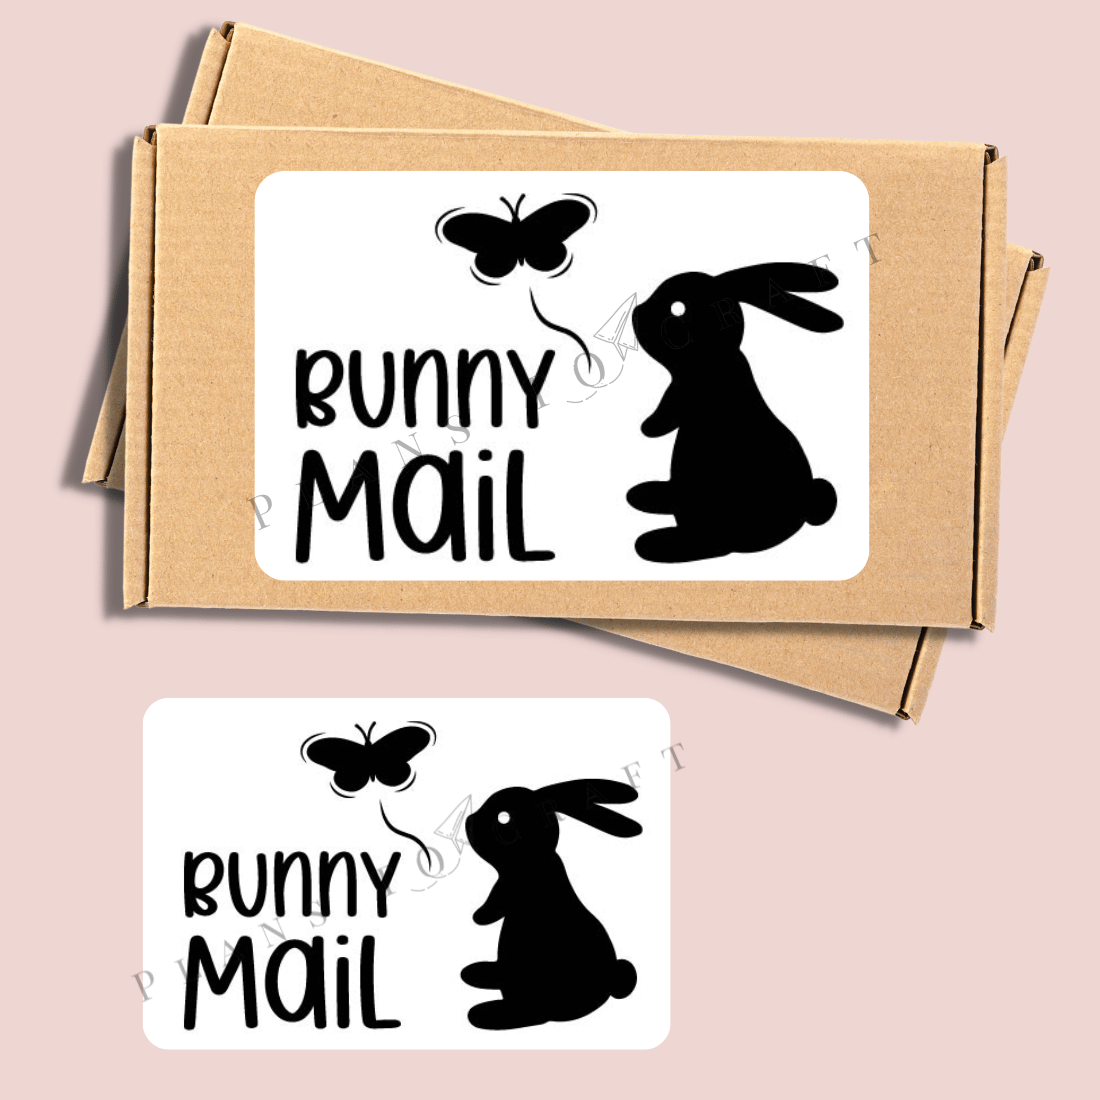 Pair of bunny mail stickers on a pink background.